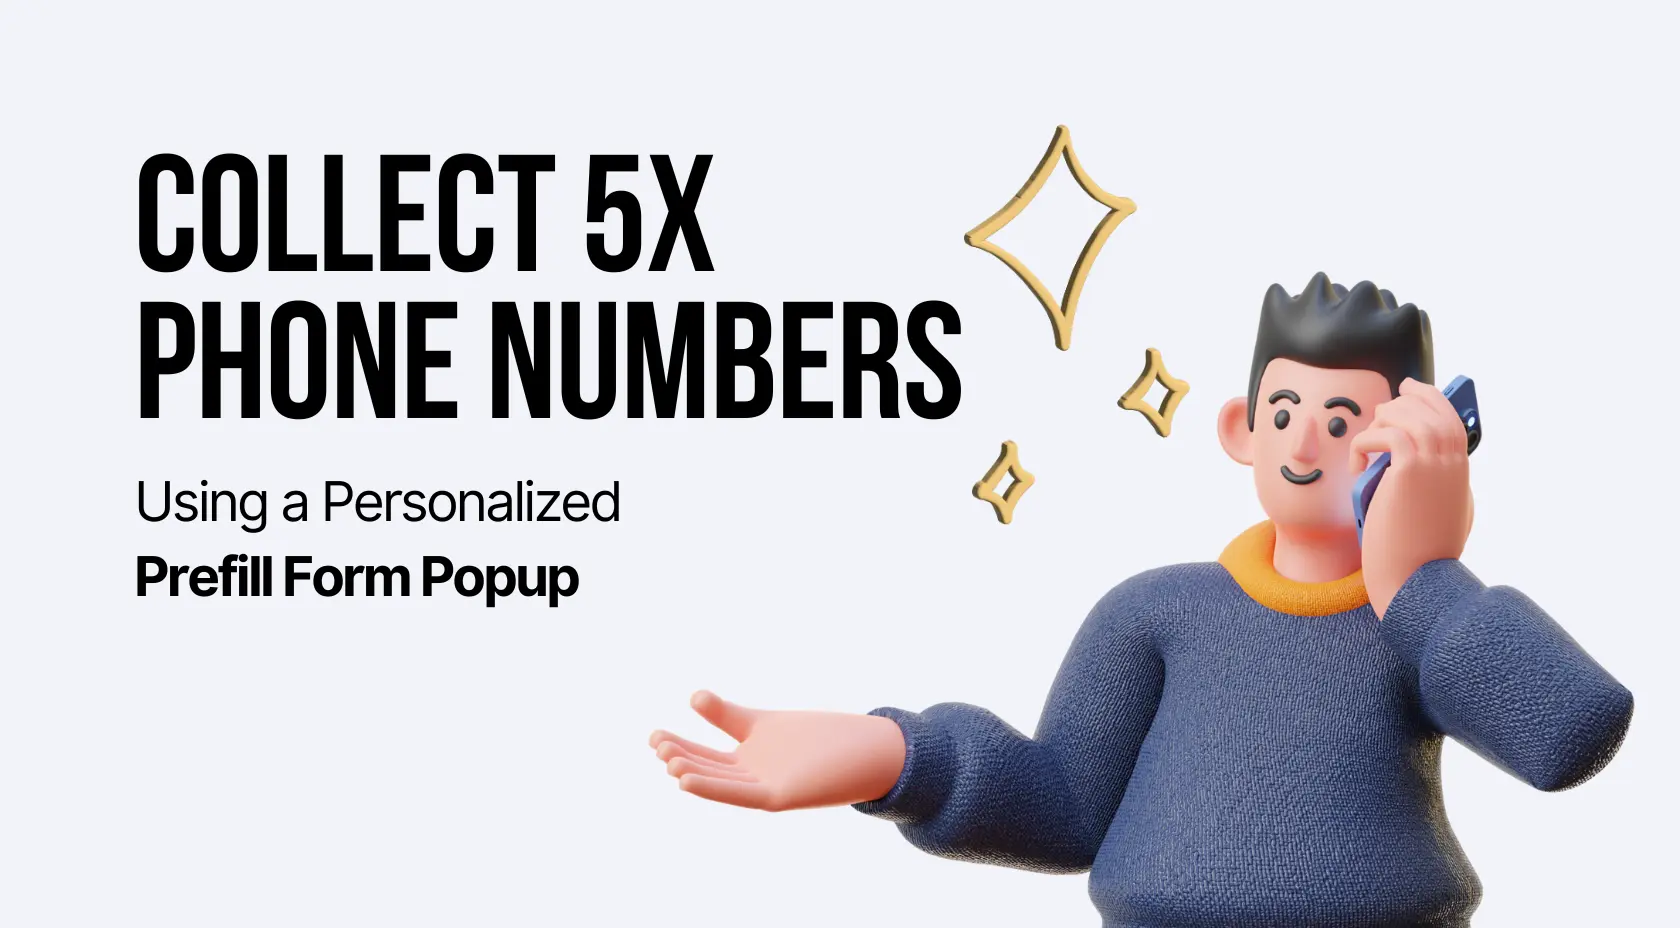 Collect 5X Phone Numbers Using a Personalized & Prefilled Popup